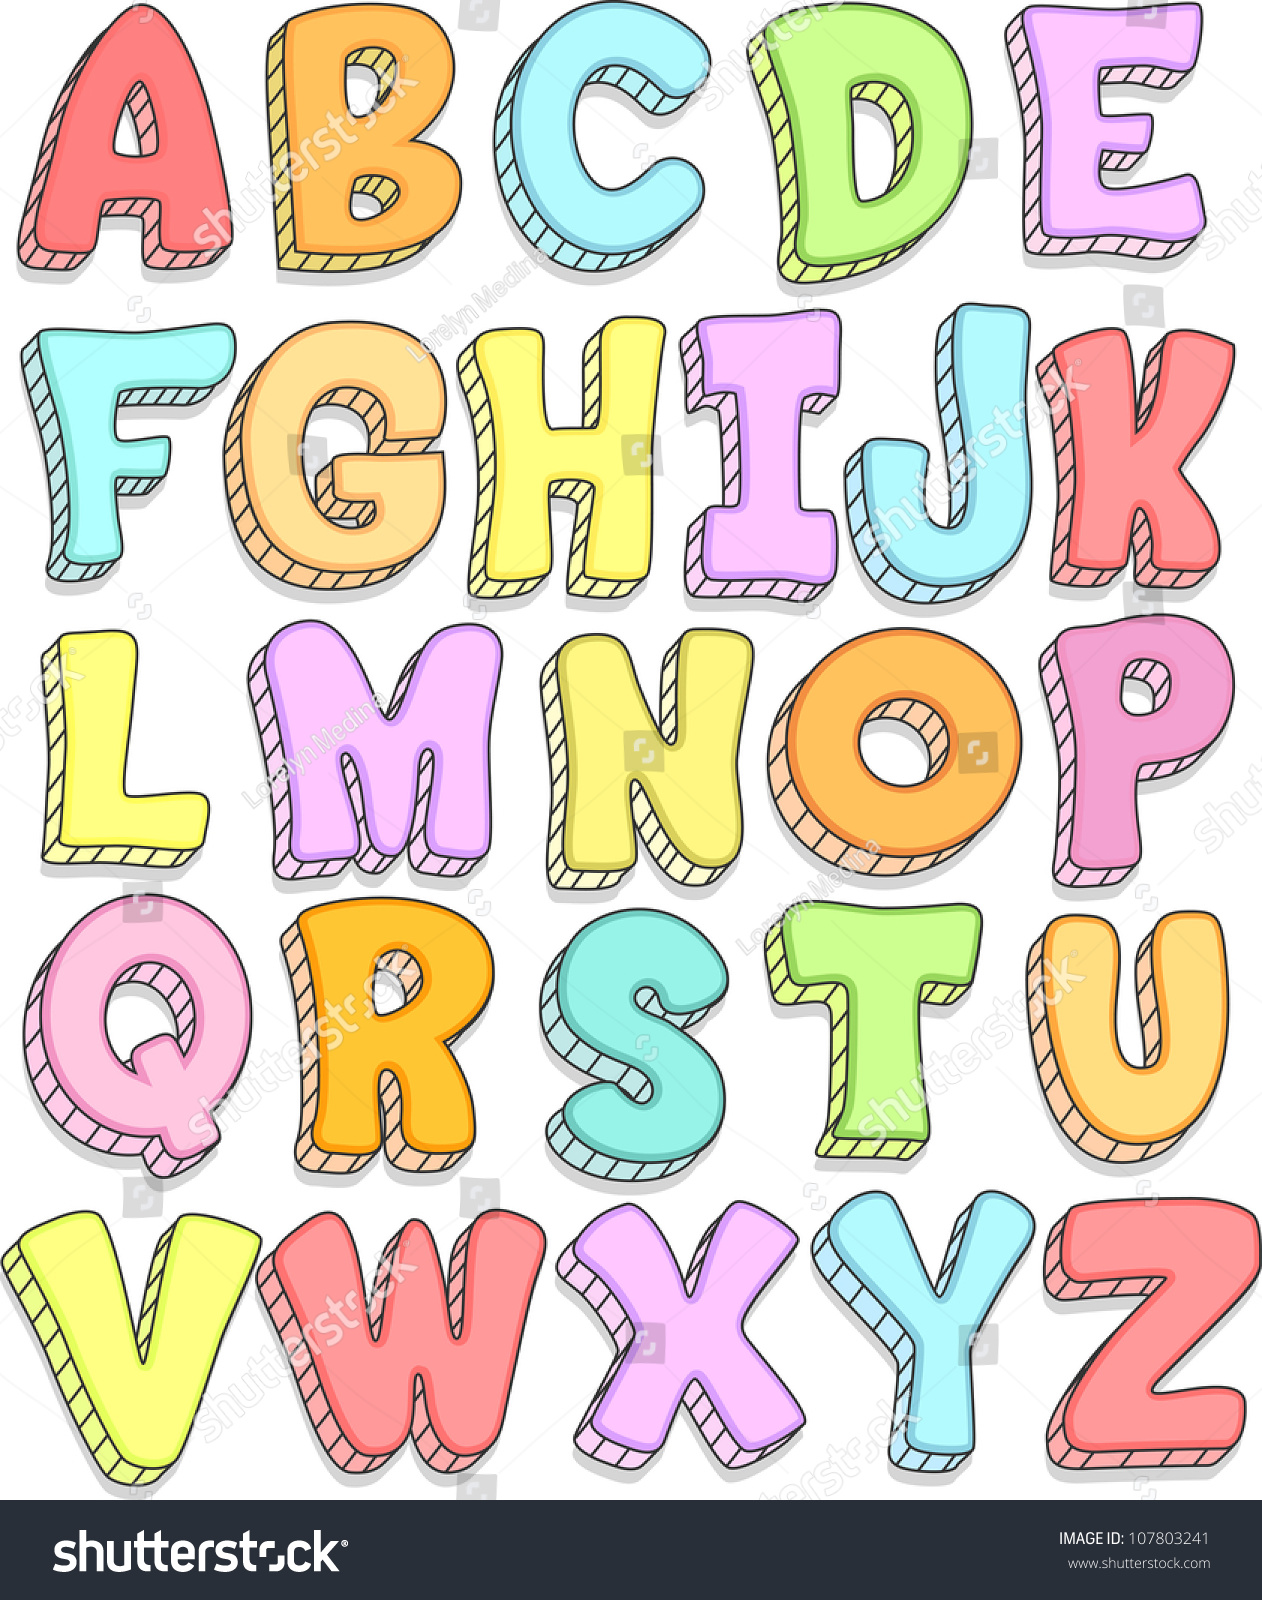 Doodle Illustration Featuring The Capital Letters Of The Alphabet ...